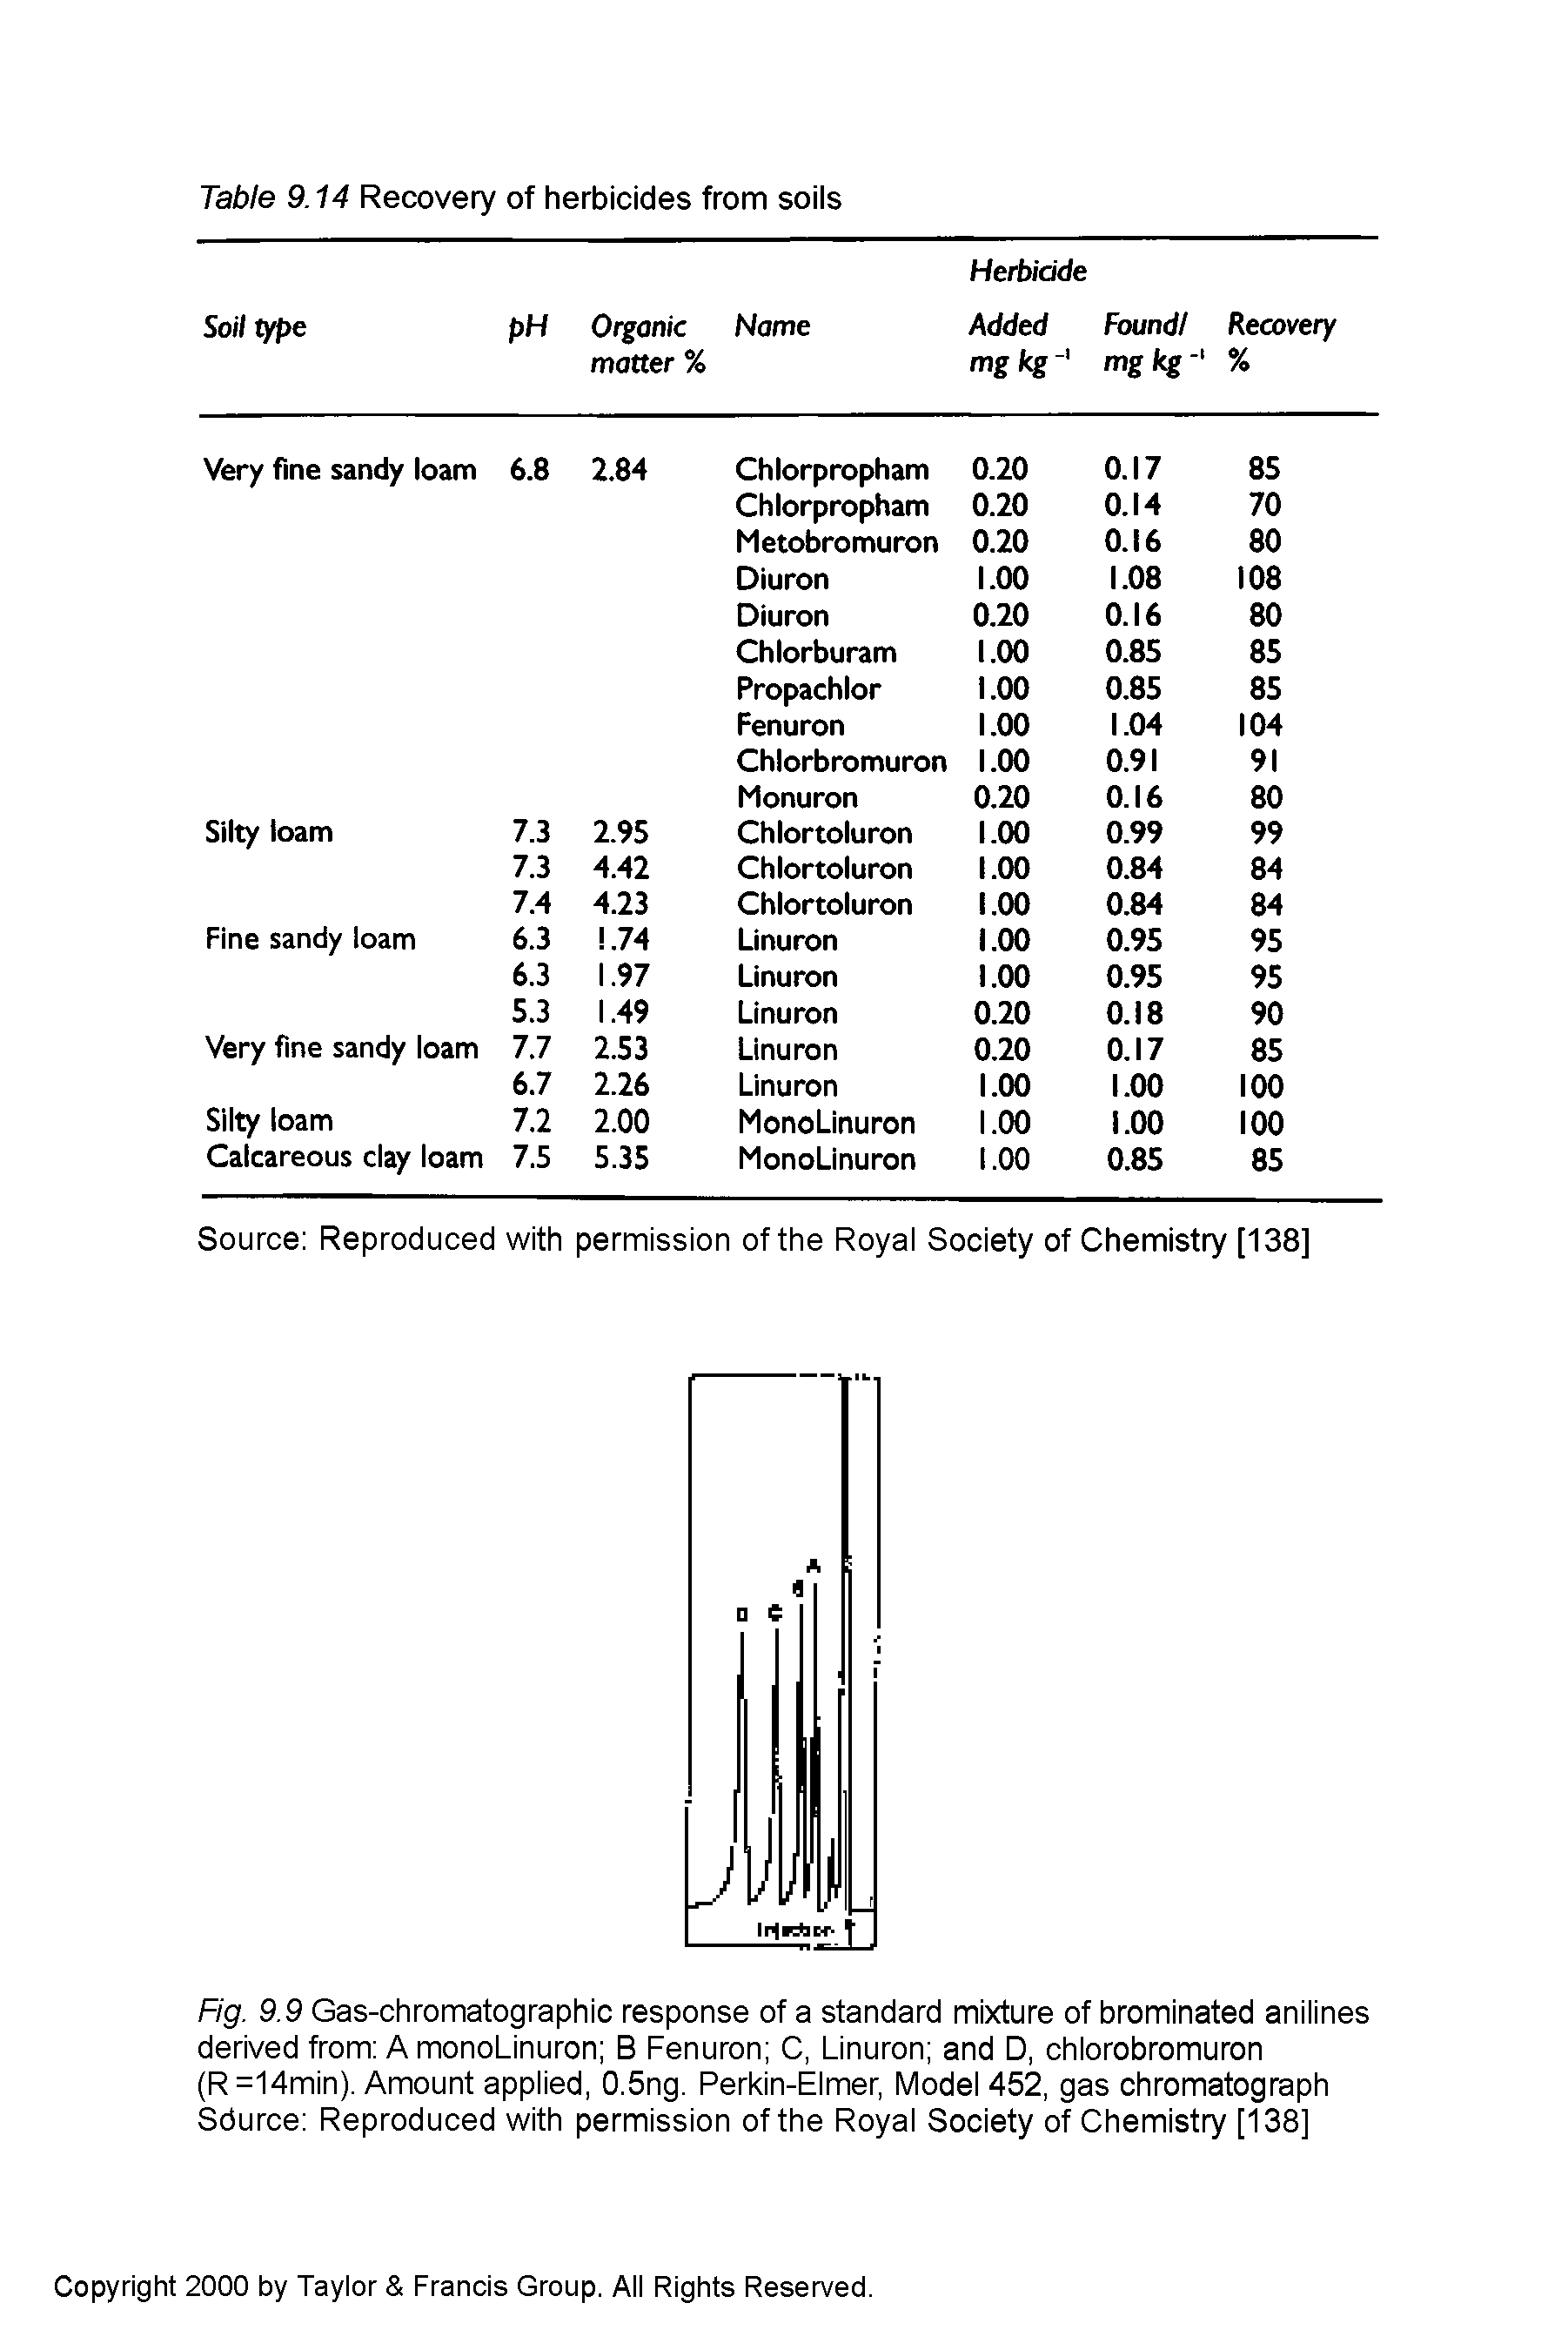 Fig. 9.9 Gas-chromatographic response of a standard mixture of brominated anilines derived from A monoLinuron B Fenuron C, Linuron and D, chlorobromuron (R=14min). Amount applied, 0.5ng. Perkin-Elmer, Model 452, gas chromatograph Sdurce Reproduced with permission of the Royal Society of Chemistry [138]...